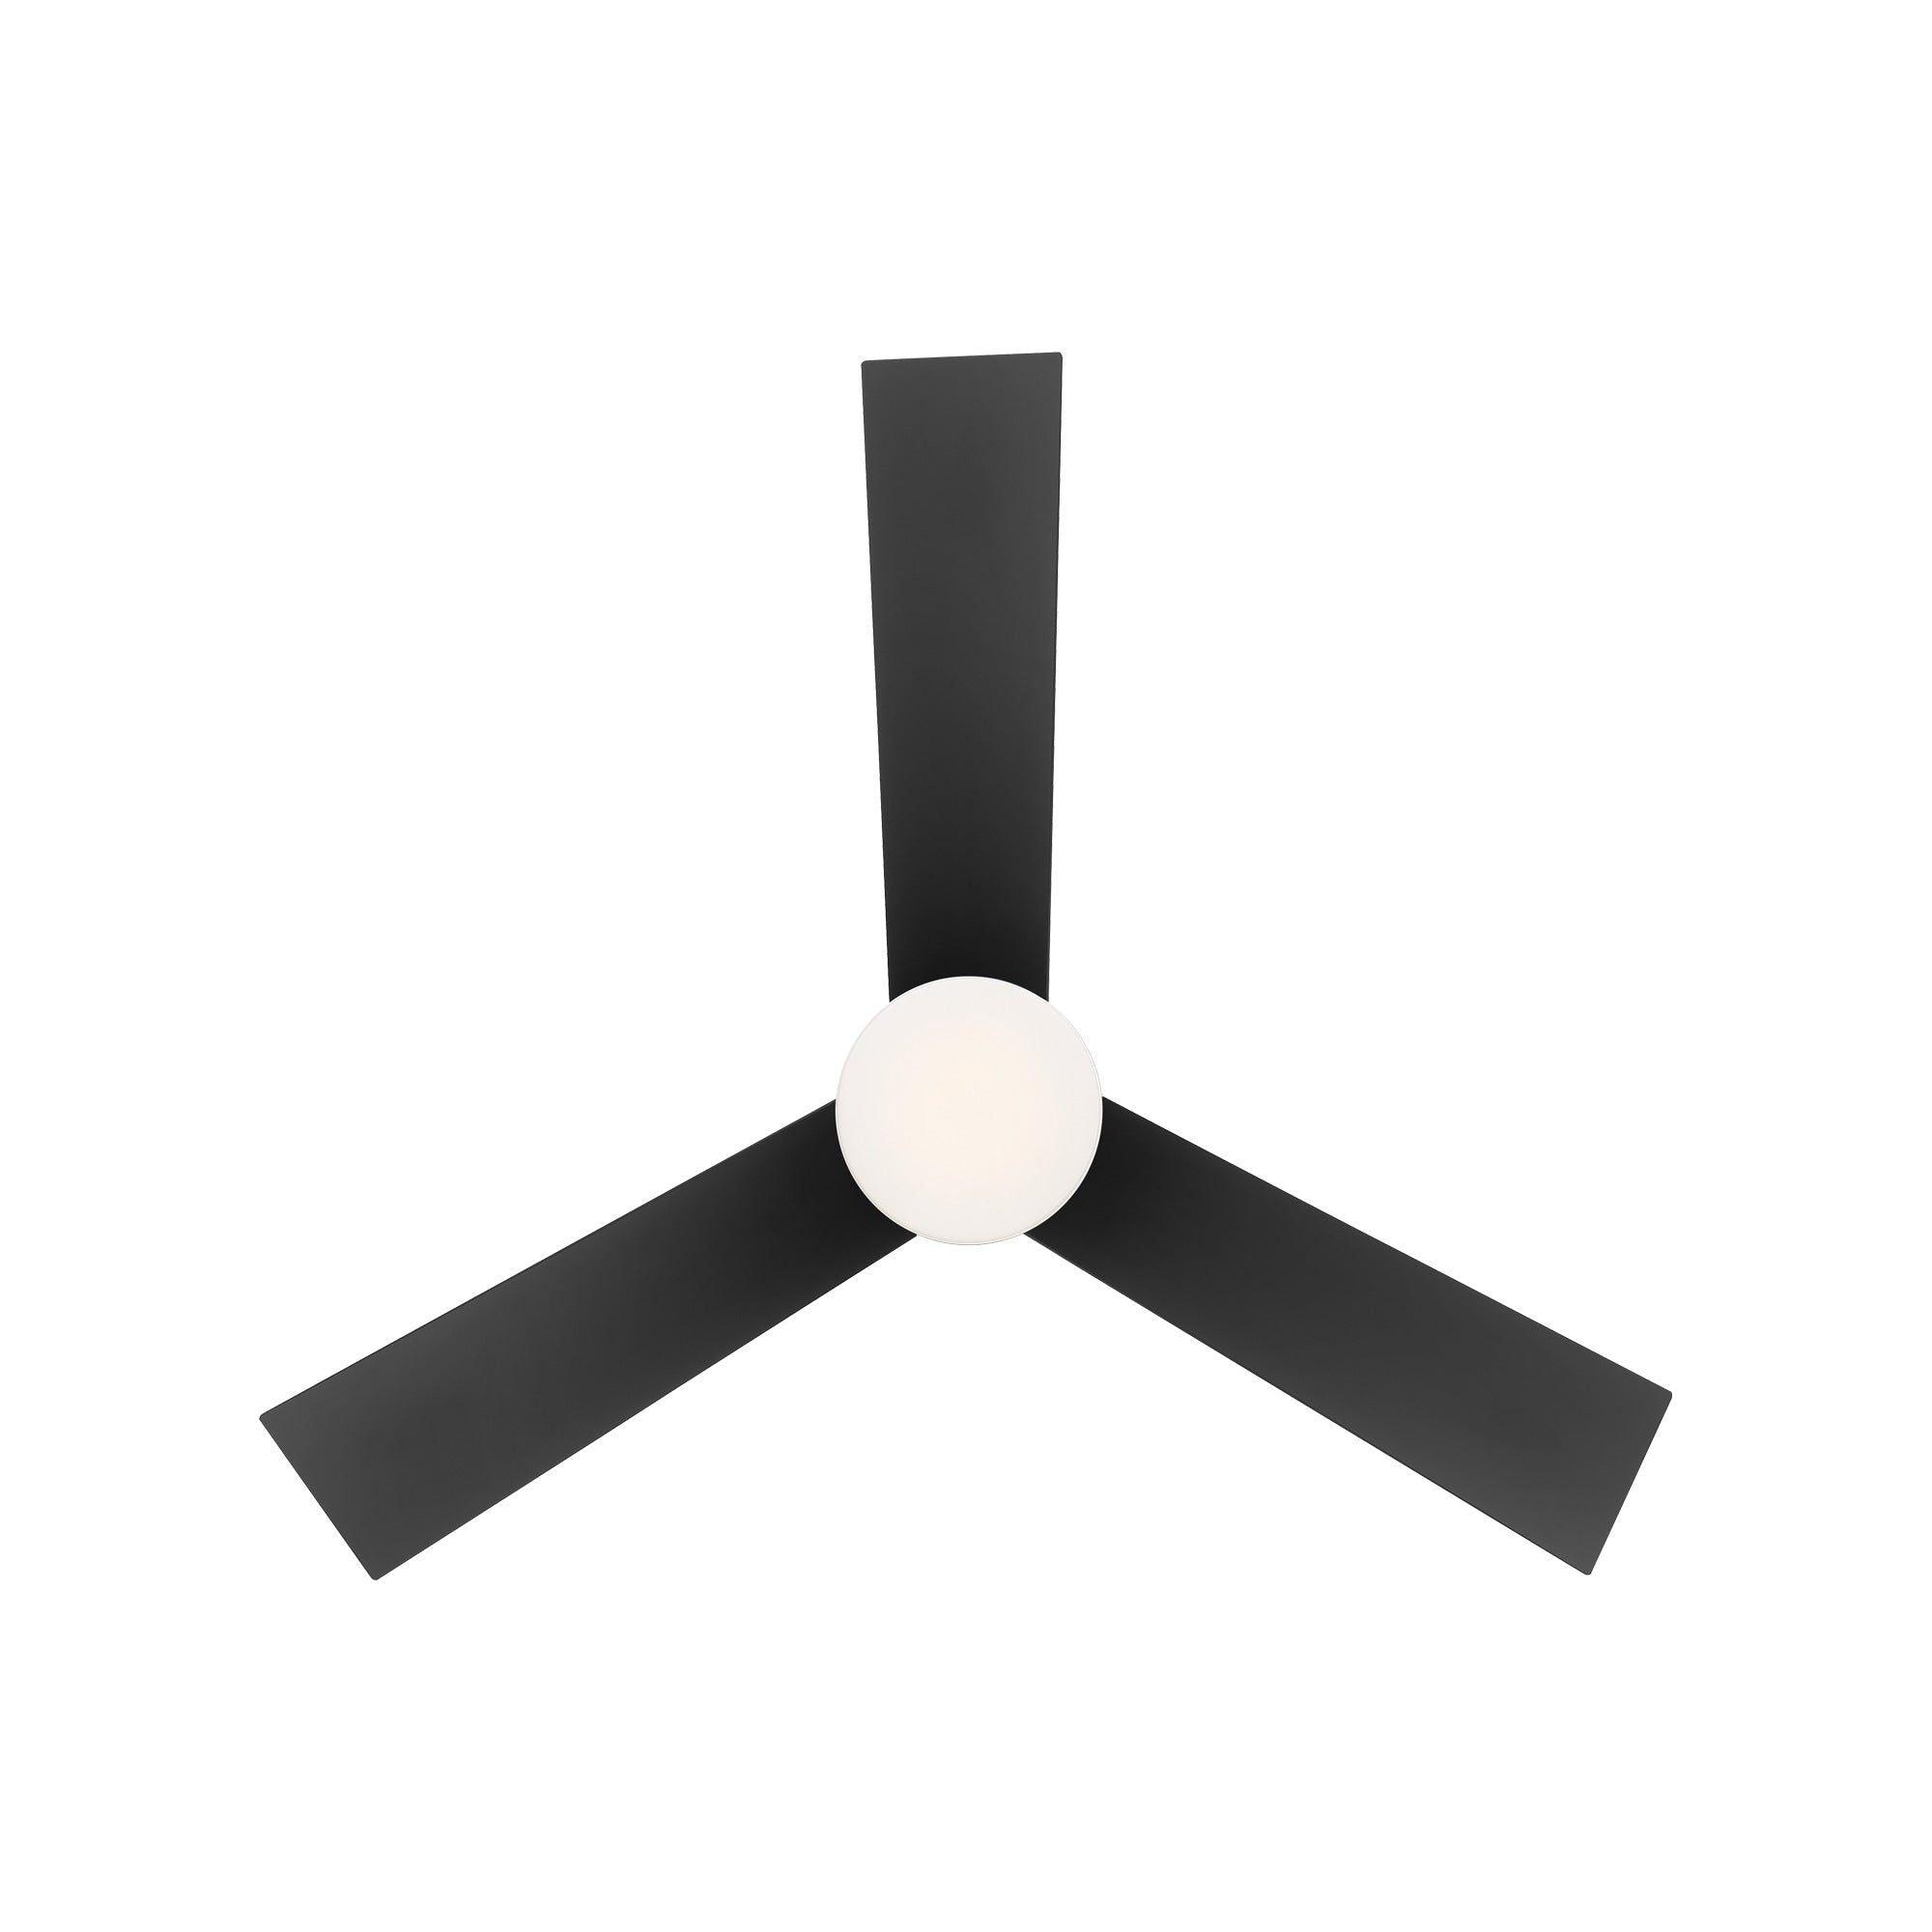 Modern Forms - Axis Indoor/Outdoor 3-Blade 44" Smart Ceiling Fan with LED Light Kit and Remote Control - Lights Canada